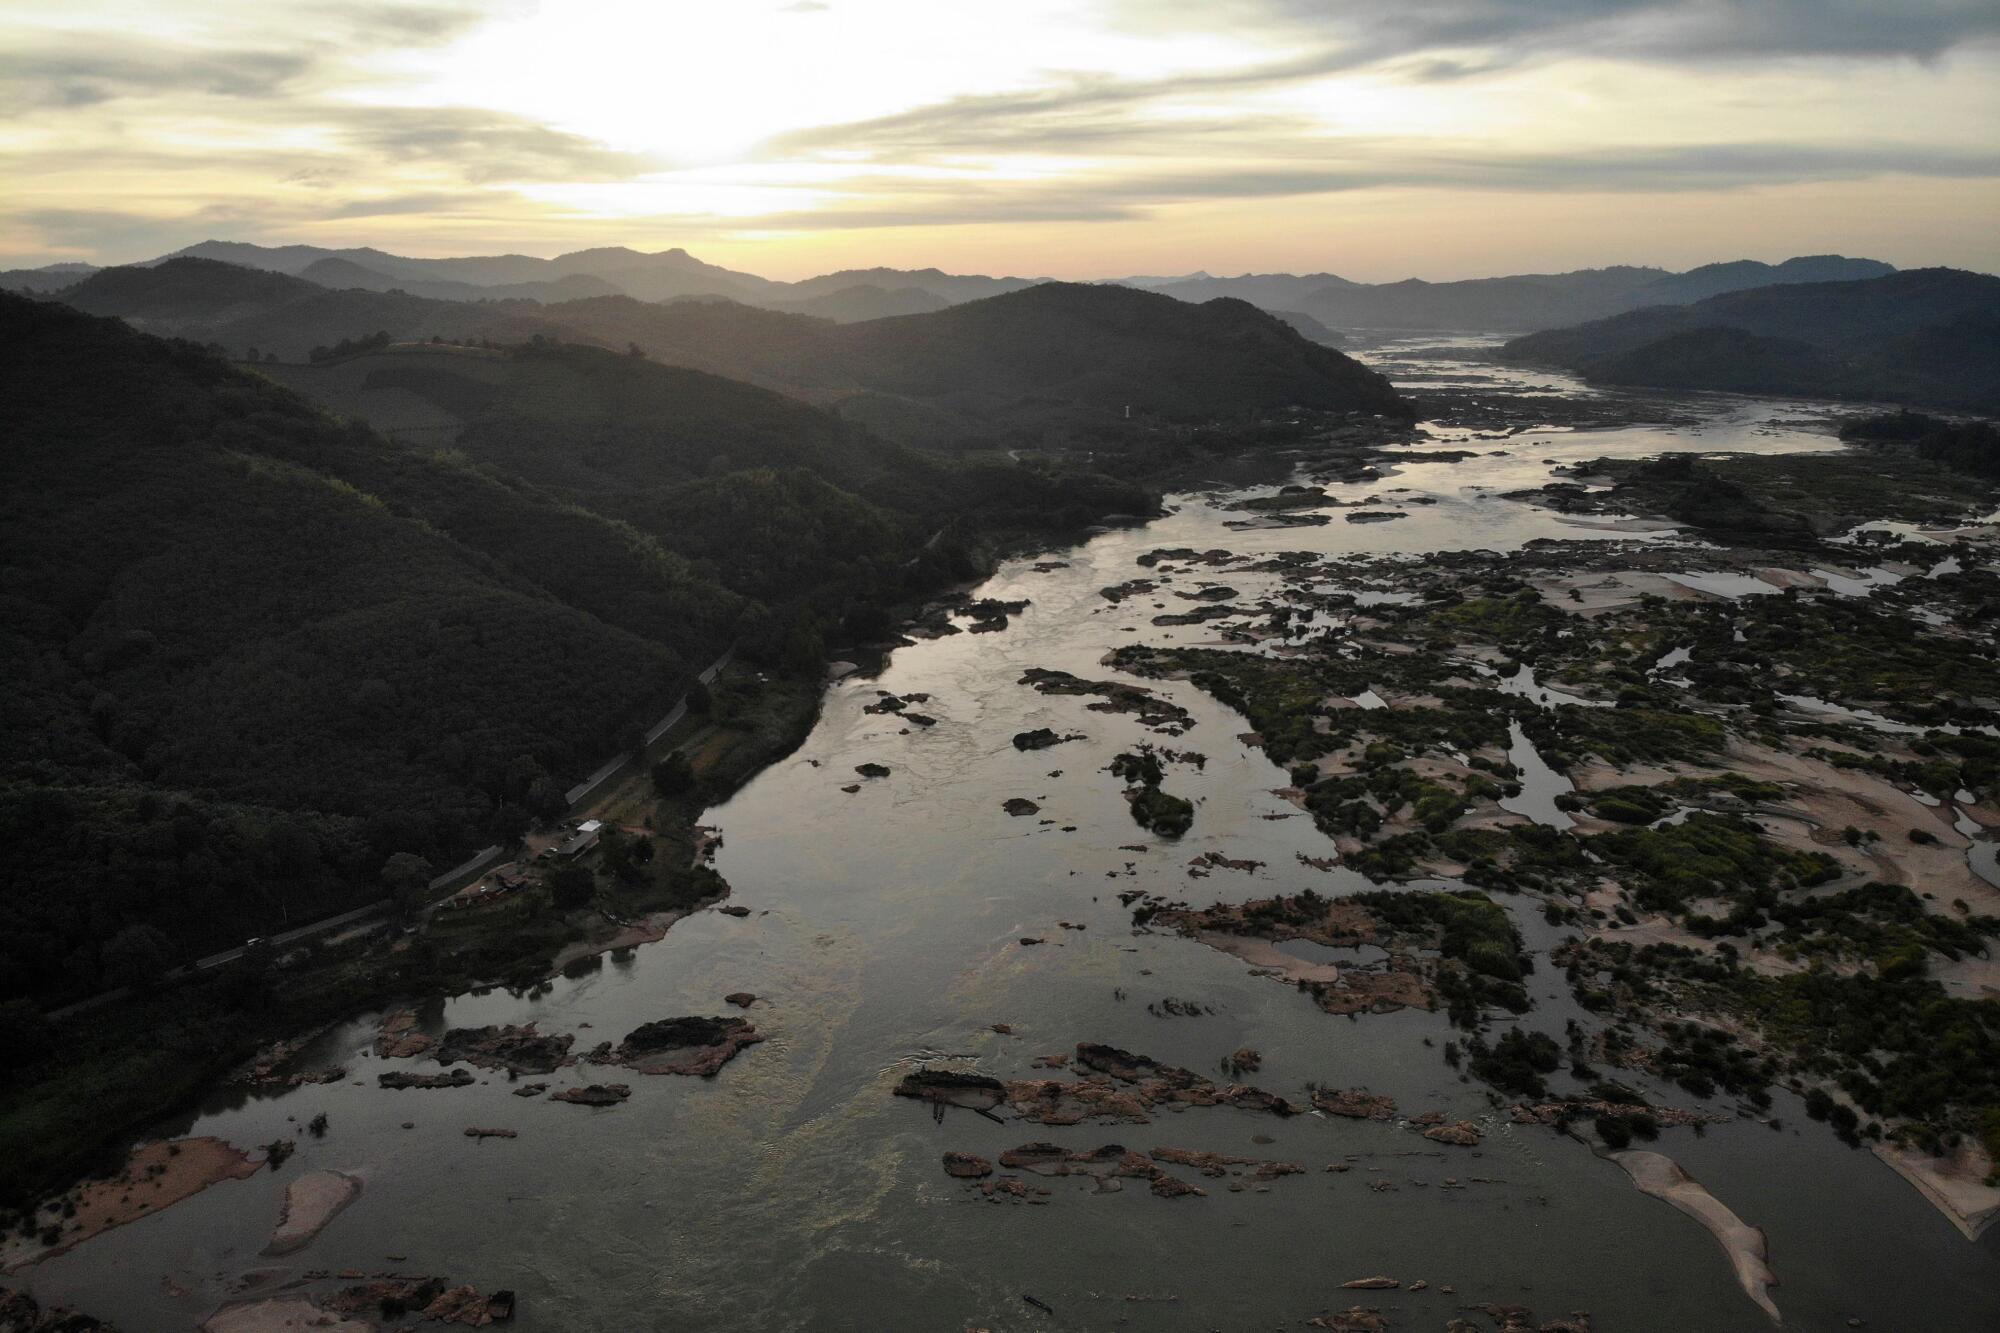 The Mekong River flows through the northeastern Thailand province of Nong Khai on Oct. 31, 2019. Last year, the river level reached record lows across northern Thailand due to drought and a recently opened dam hundreds of miles upstream.